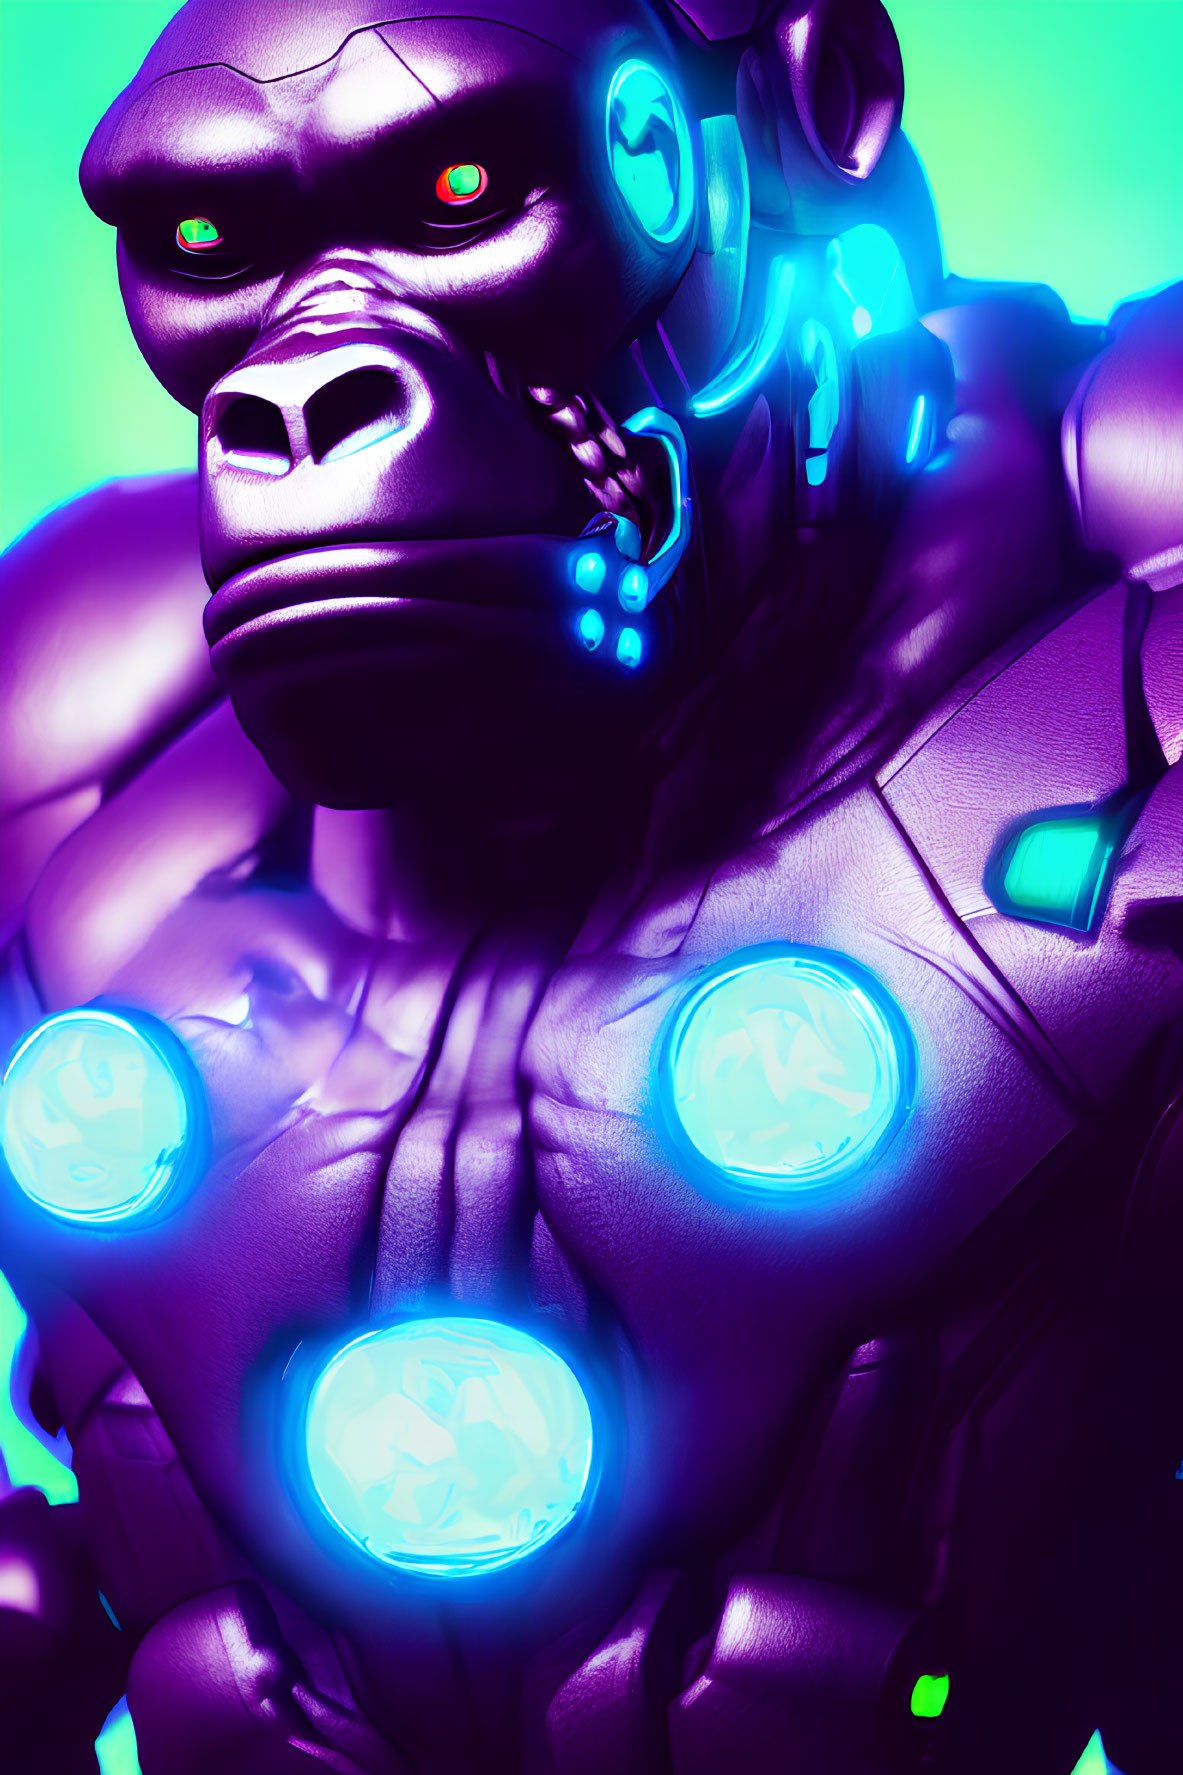 Colorful Illustration: Purple Mechanized Gorilla with Glowing Blue Circles